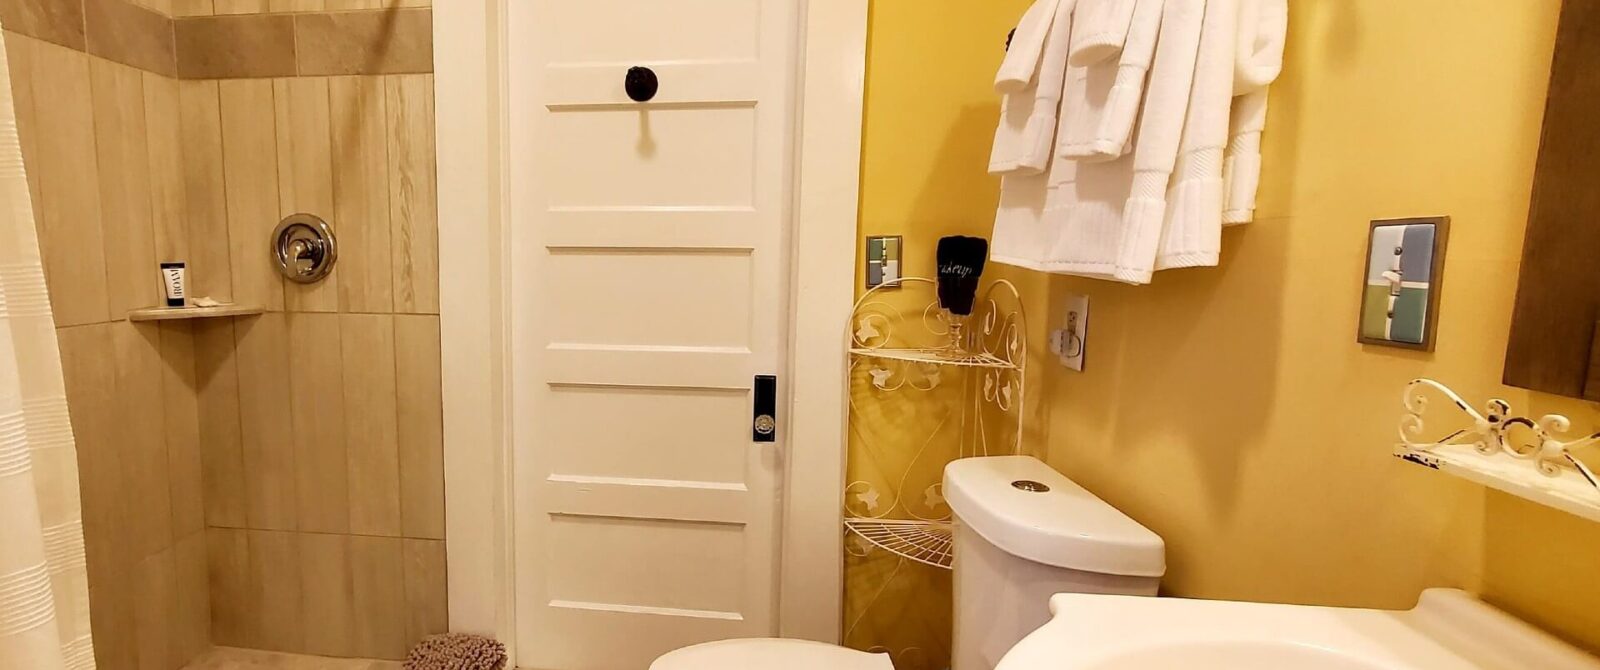 Bathroom with tiled stand up shower, pedestal sink, toilet, yellow walls and white towels hanging on a rack